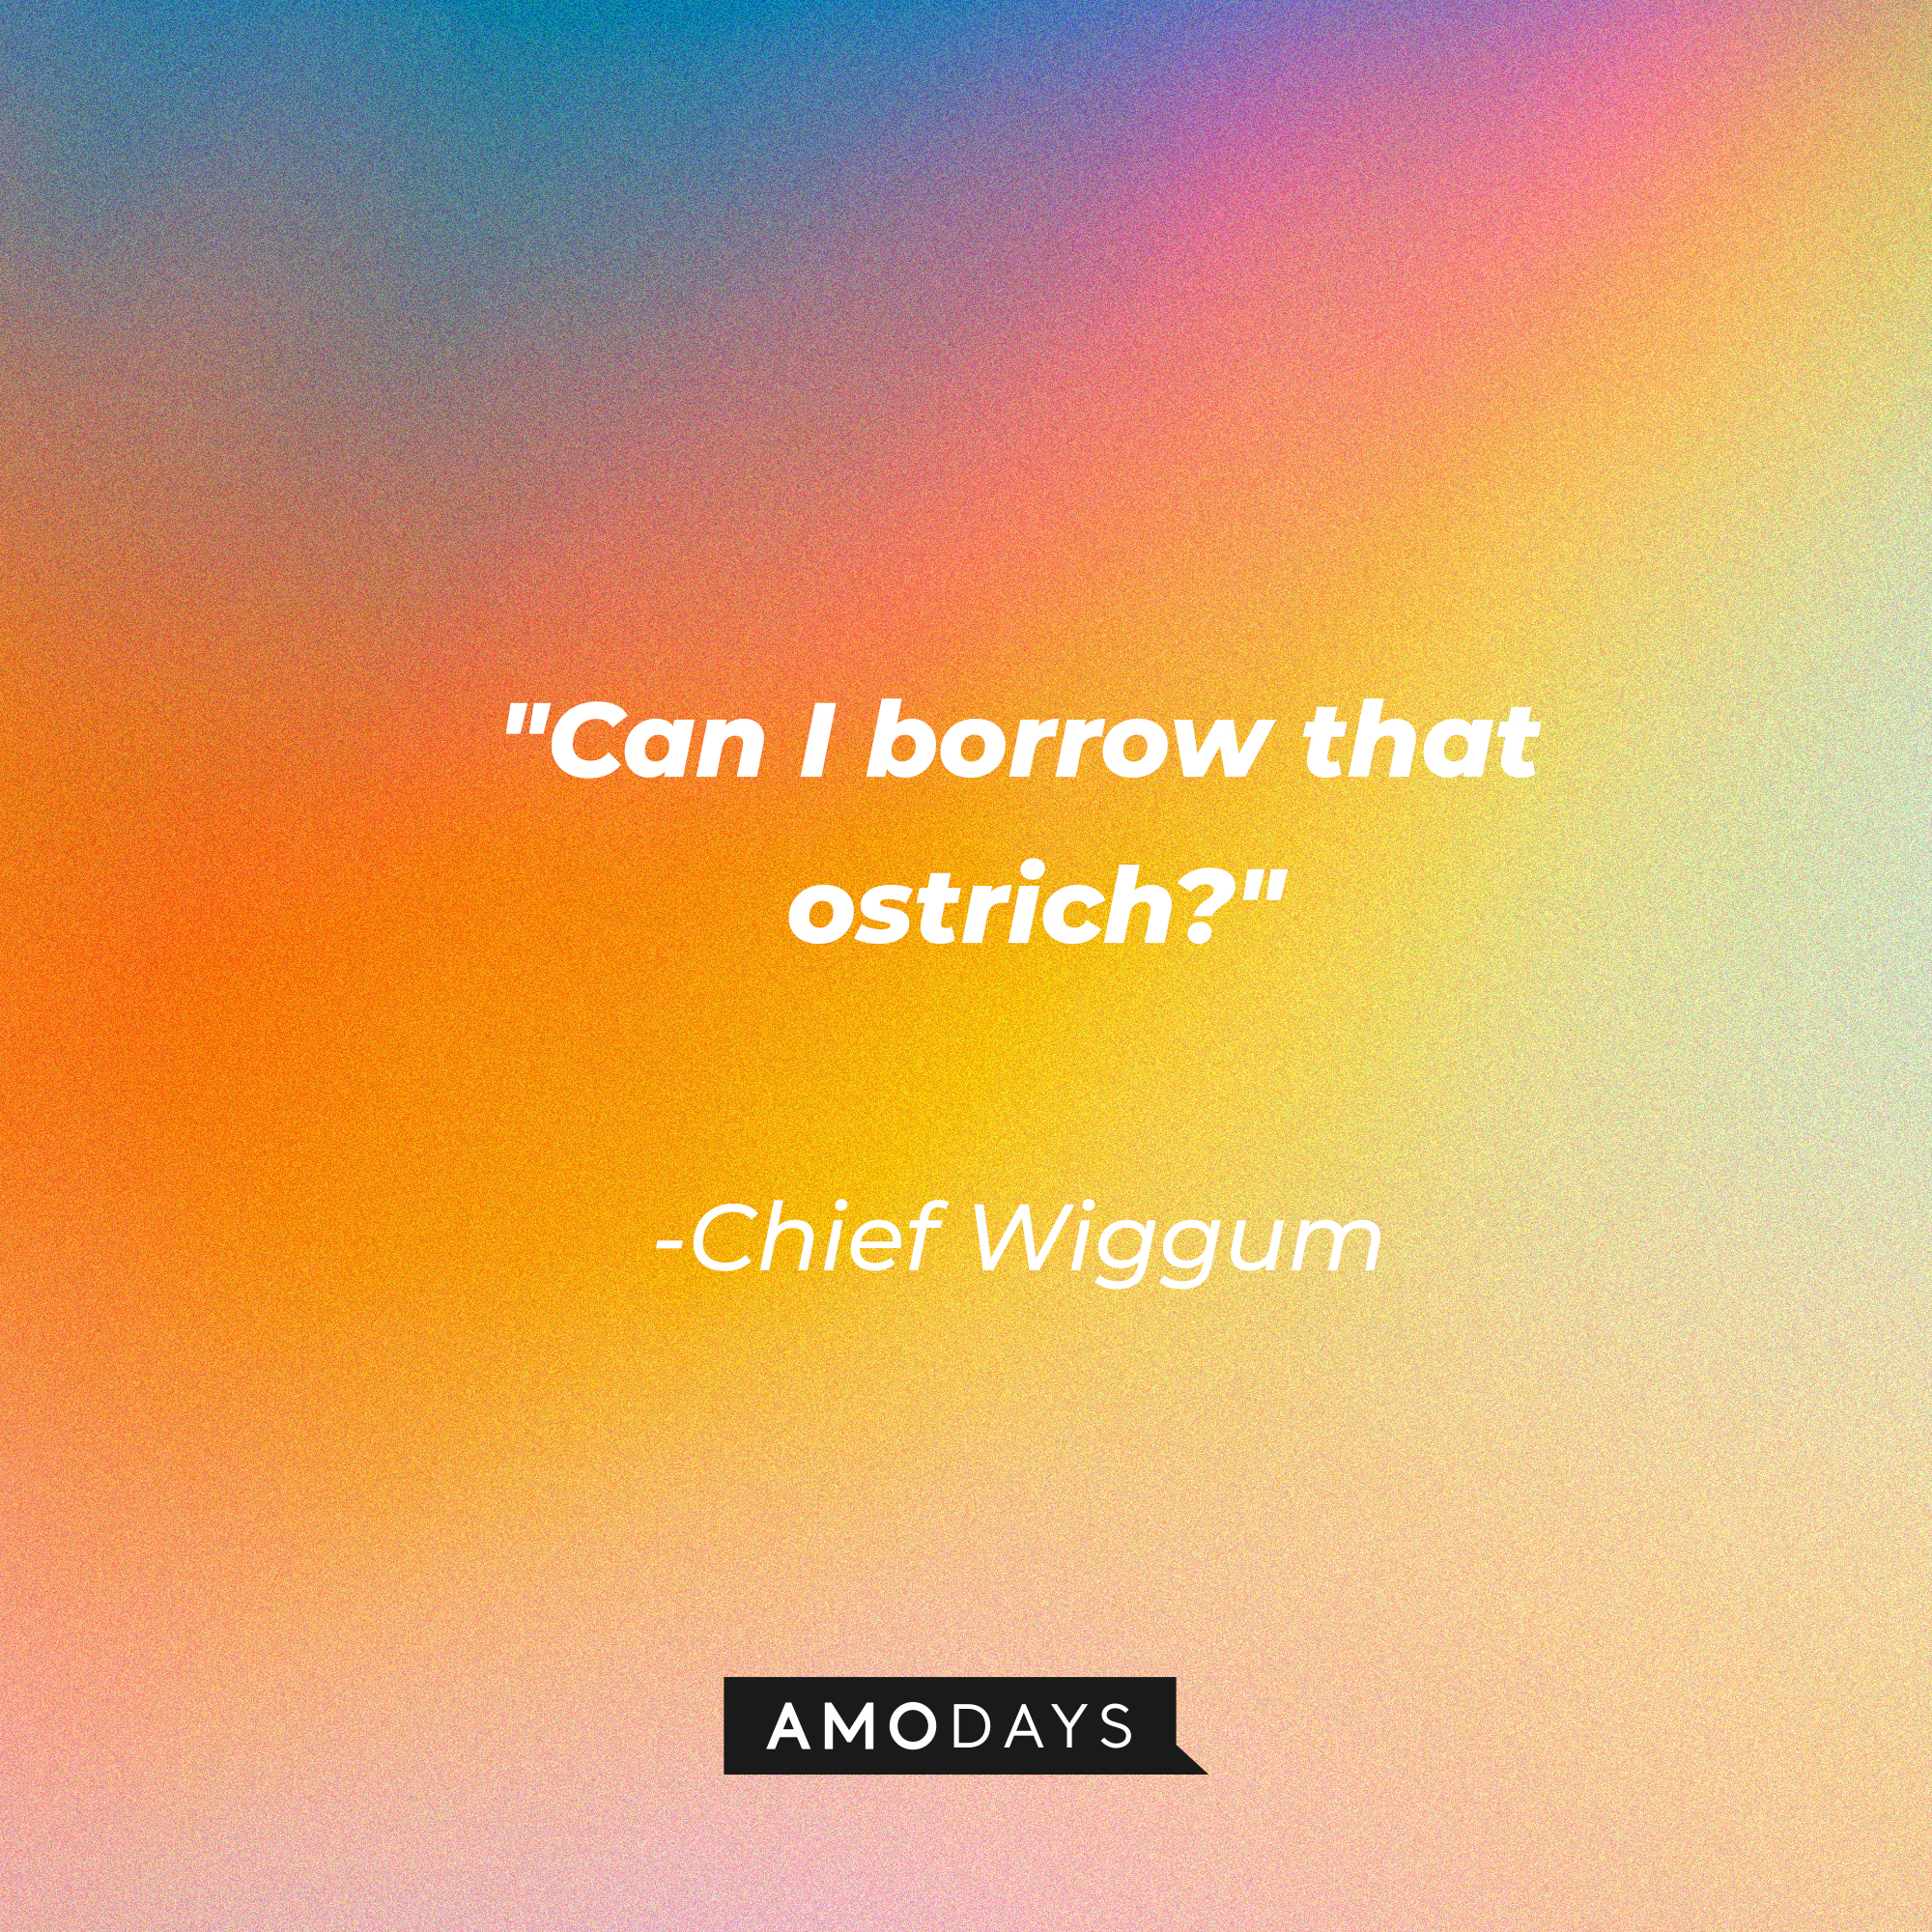 Chief Wiggum’s quote: "Can I borrow that ostrich?" | Source: Amodays